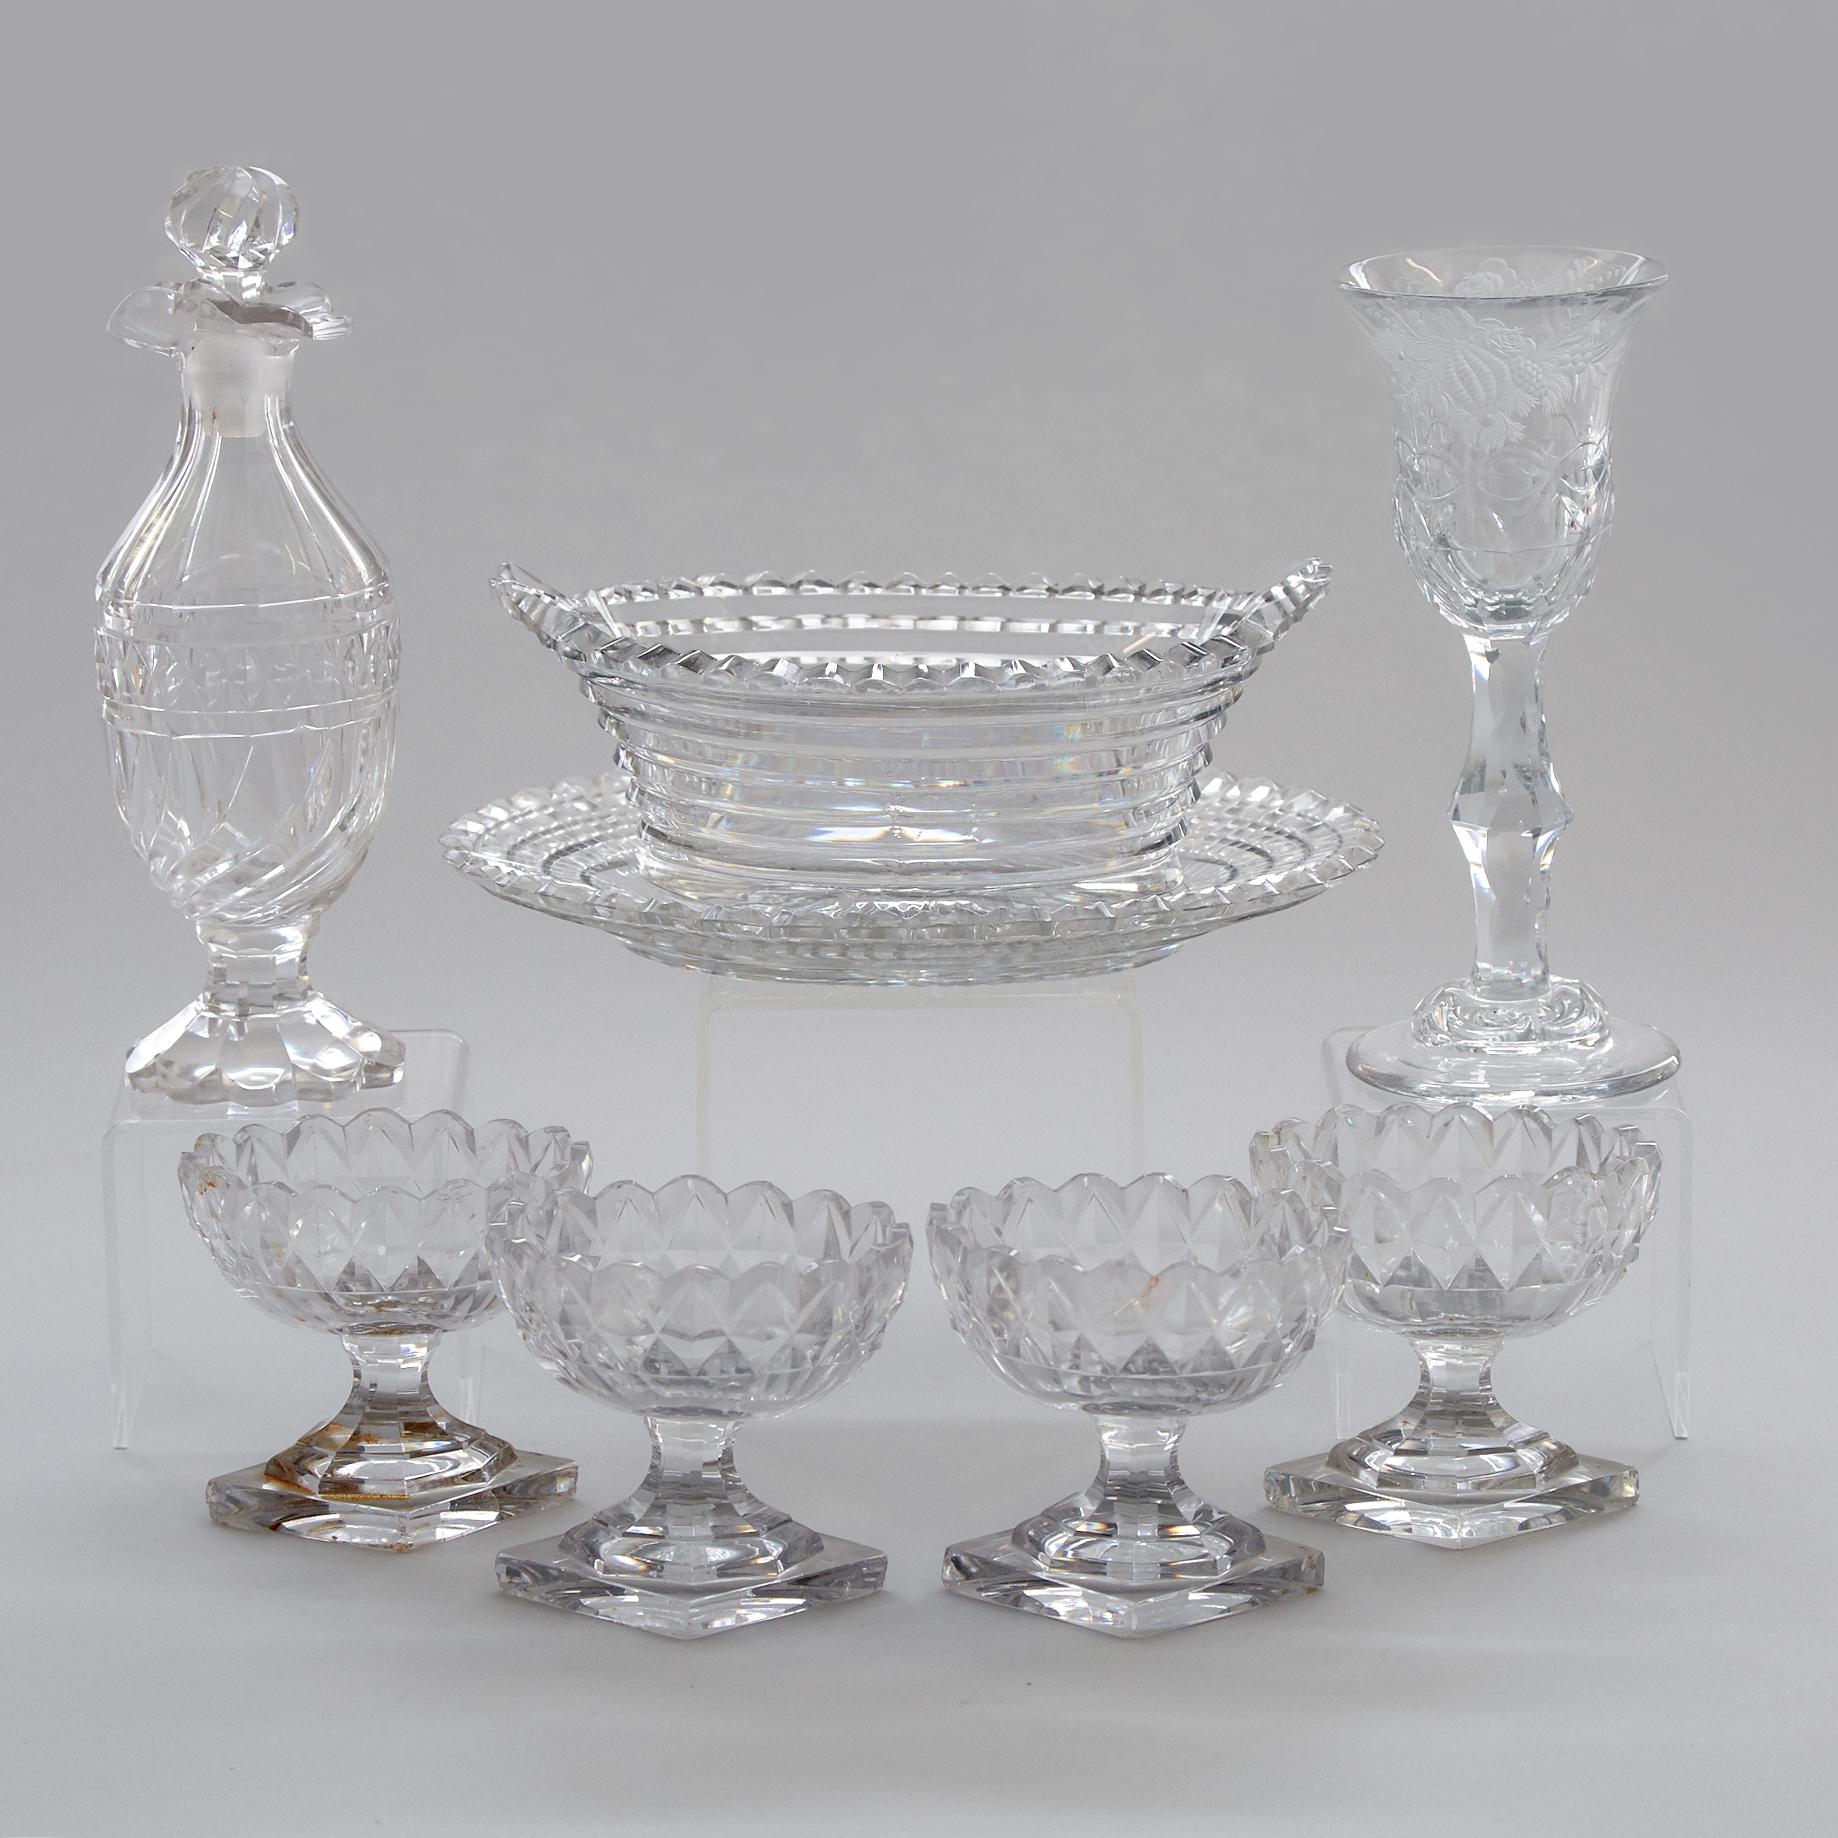 Group of Anglo-Irish Cut Glass, early 19th century